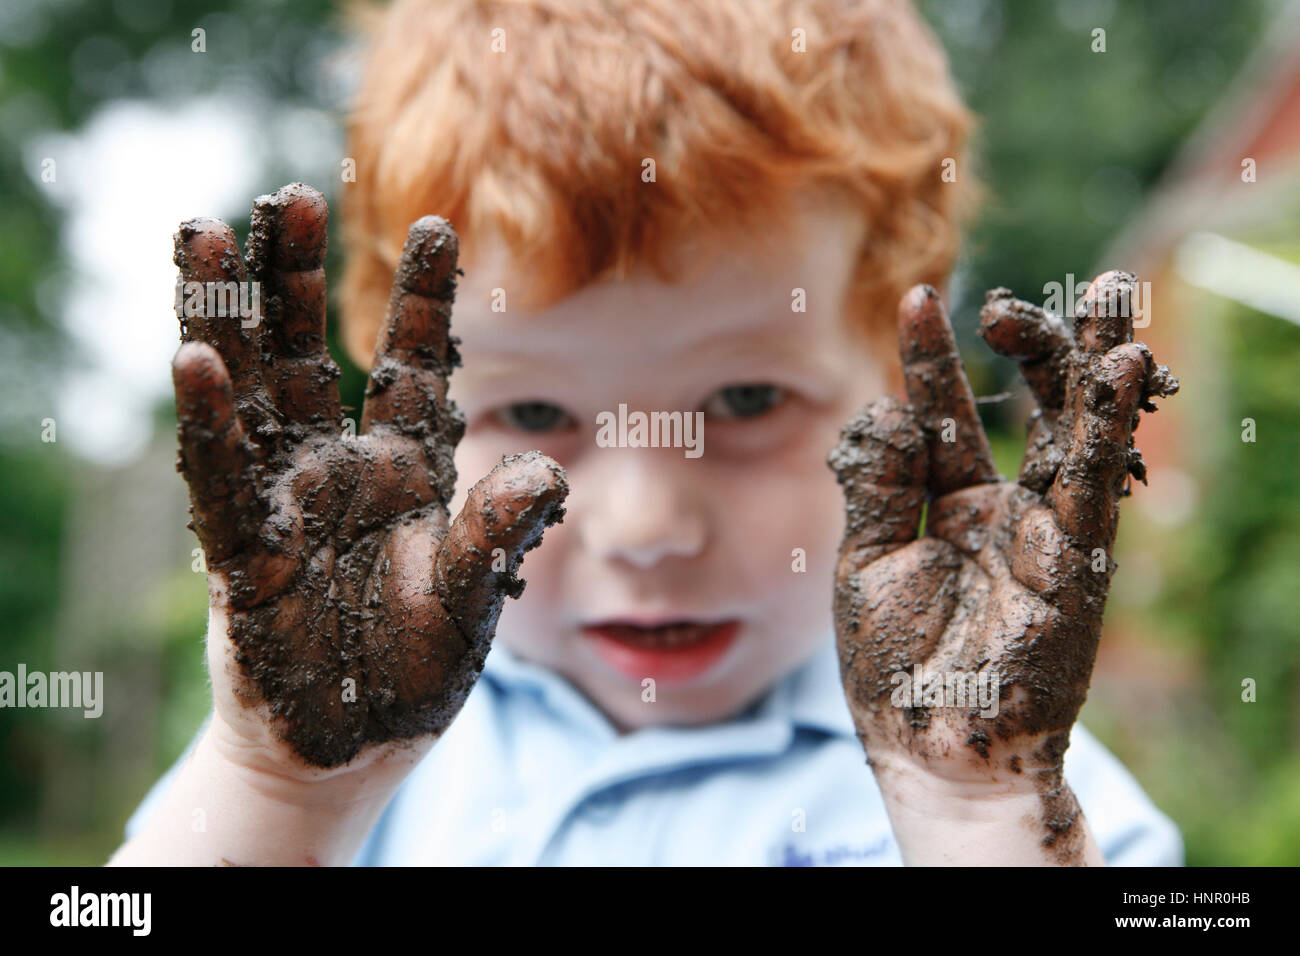 A child holding out his muddy hands Stock Photo